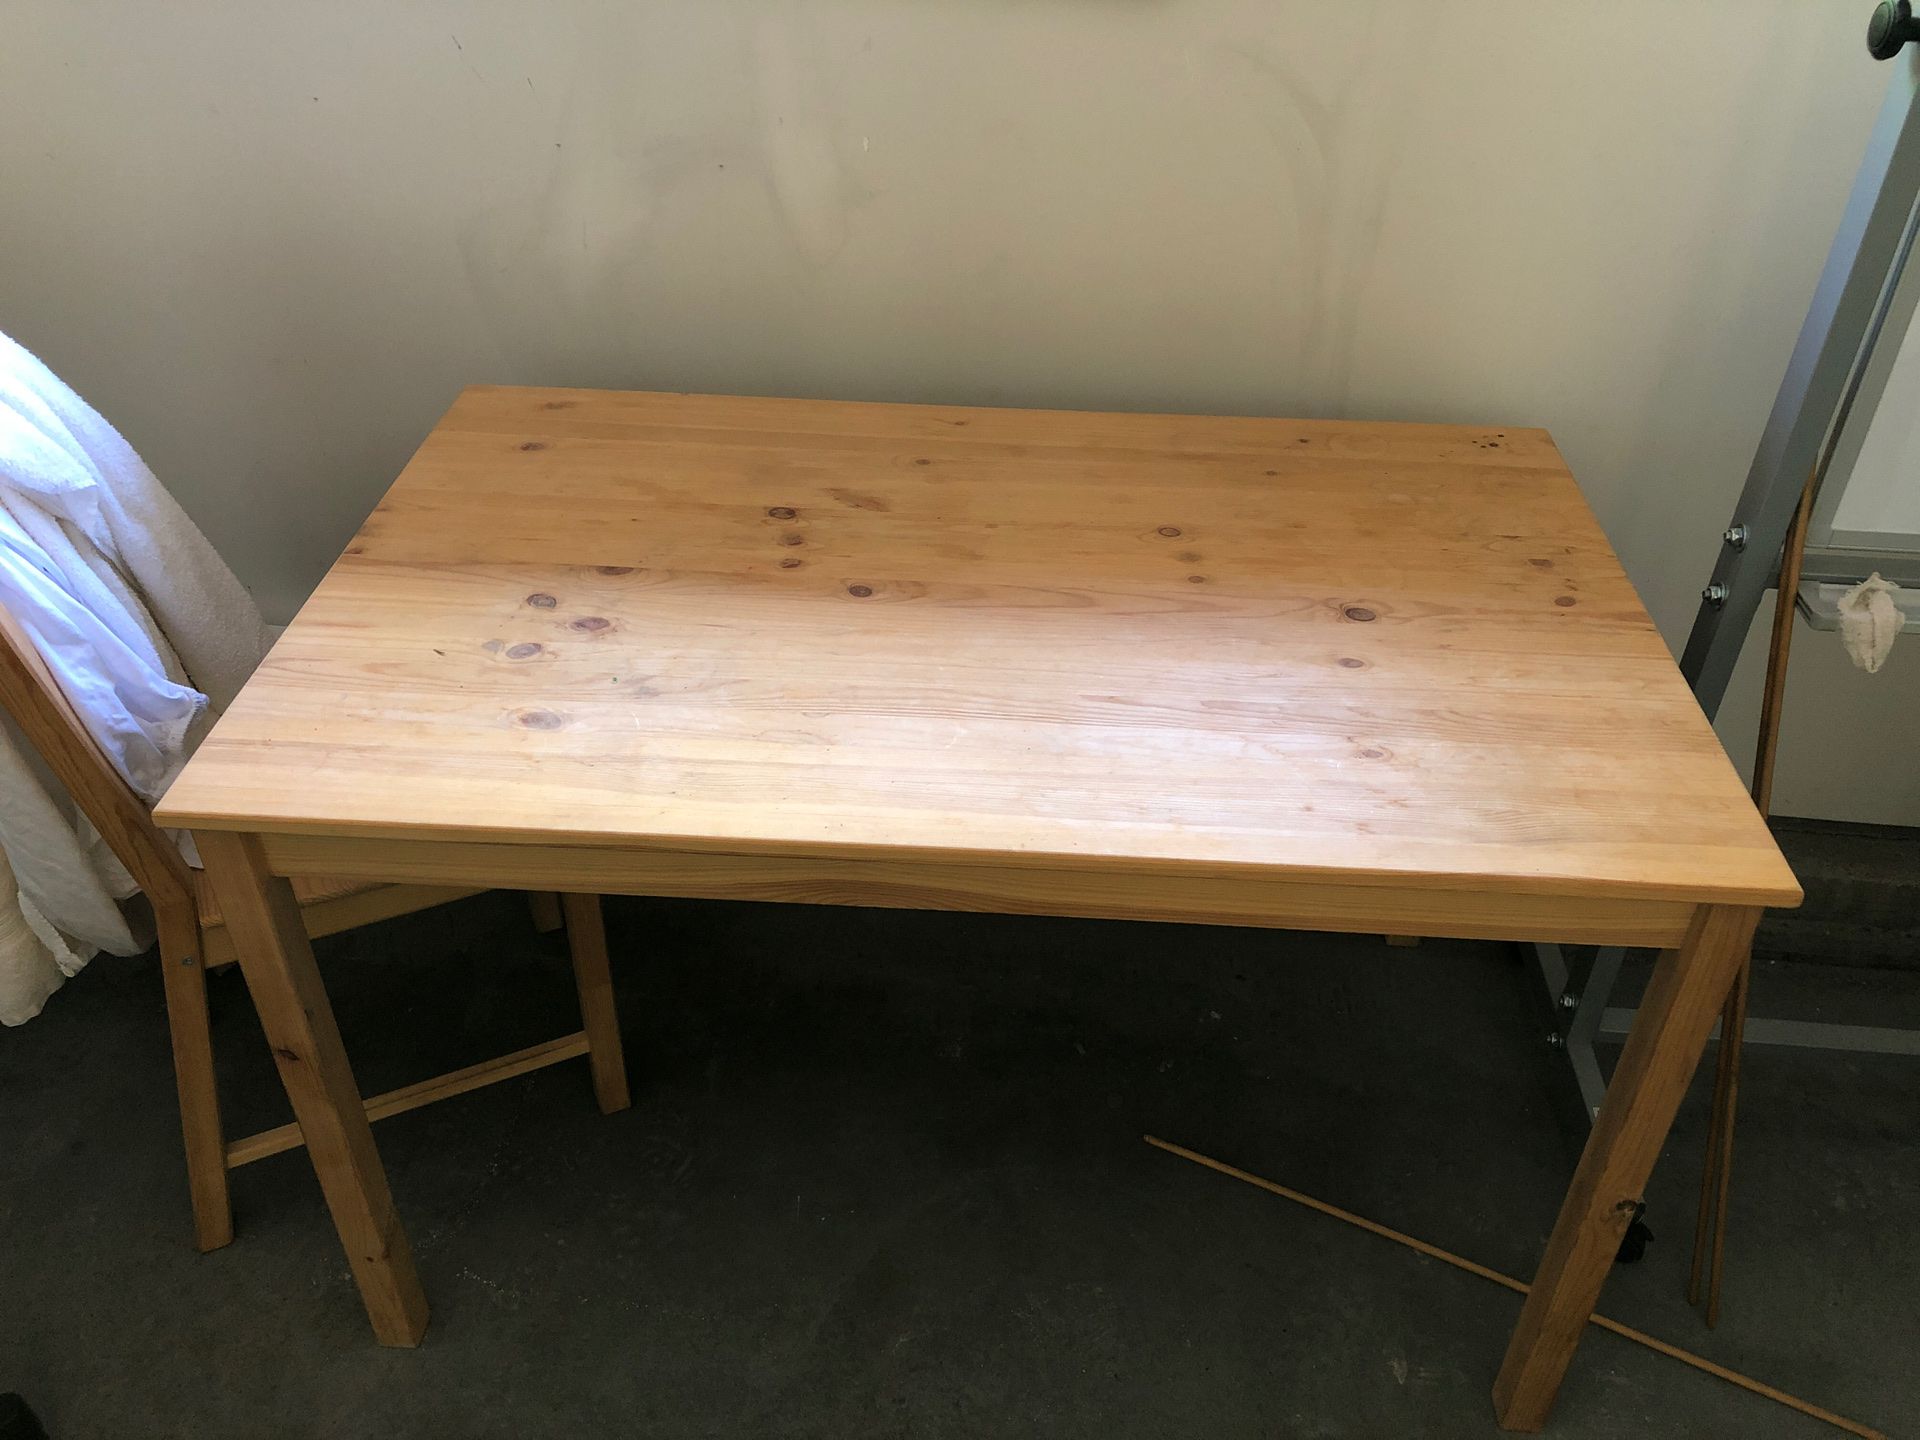 Small dining table( H:28.7,L:47.5, W: 29.5)